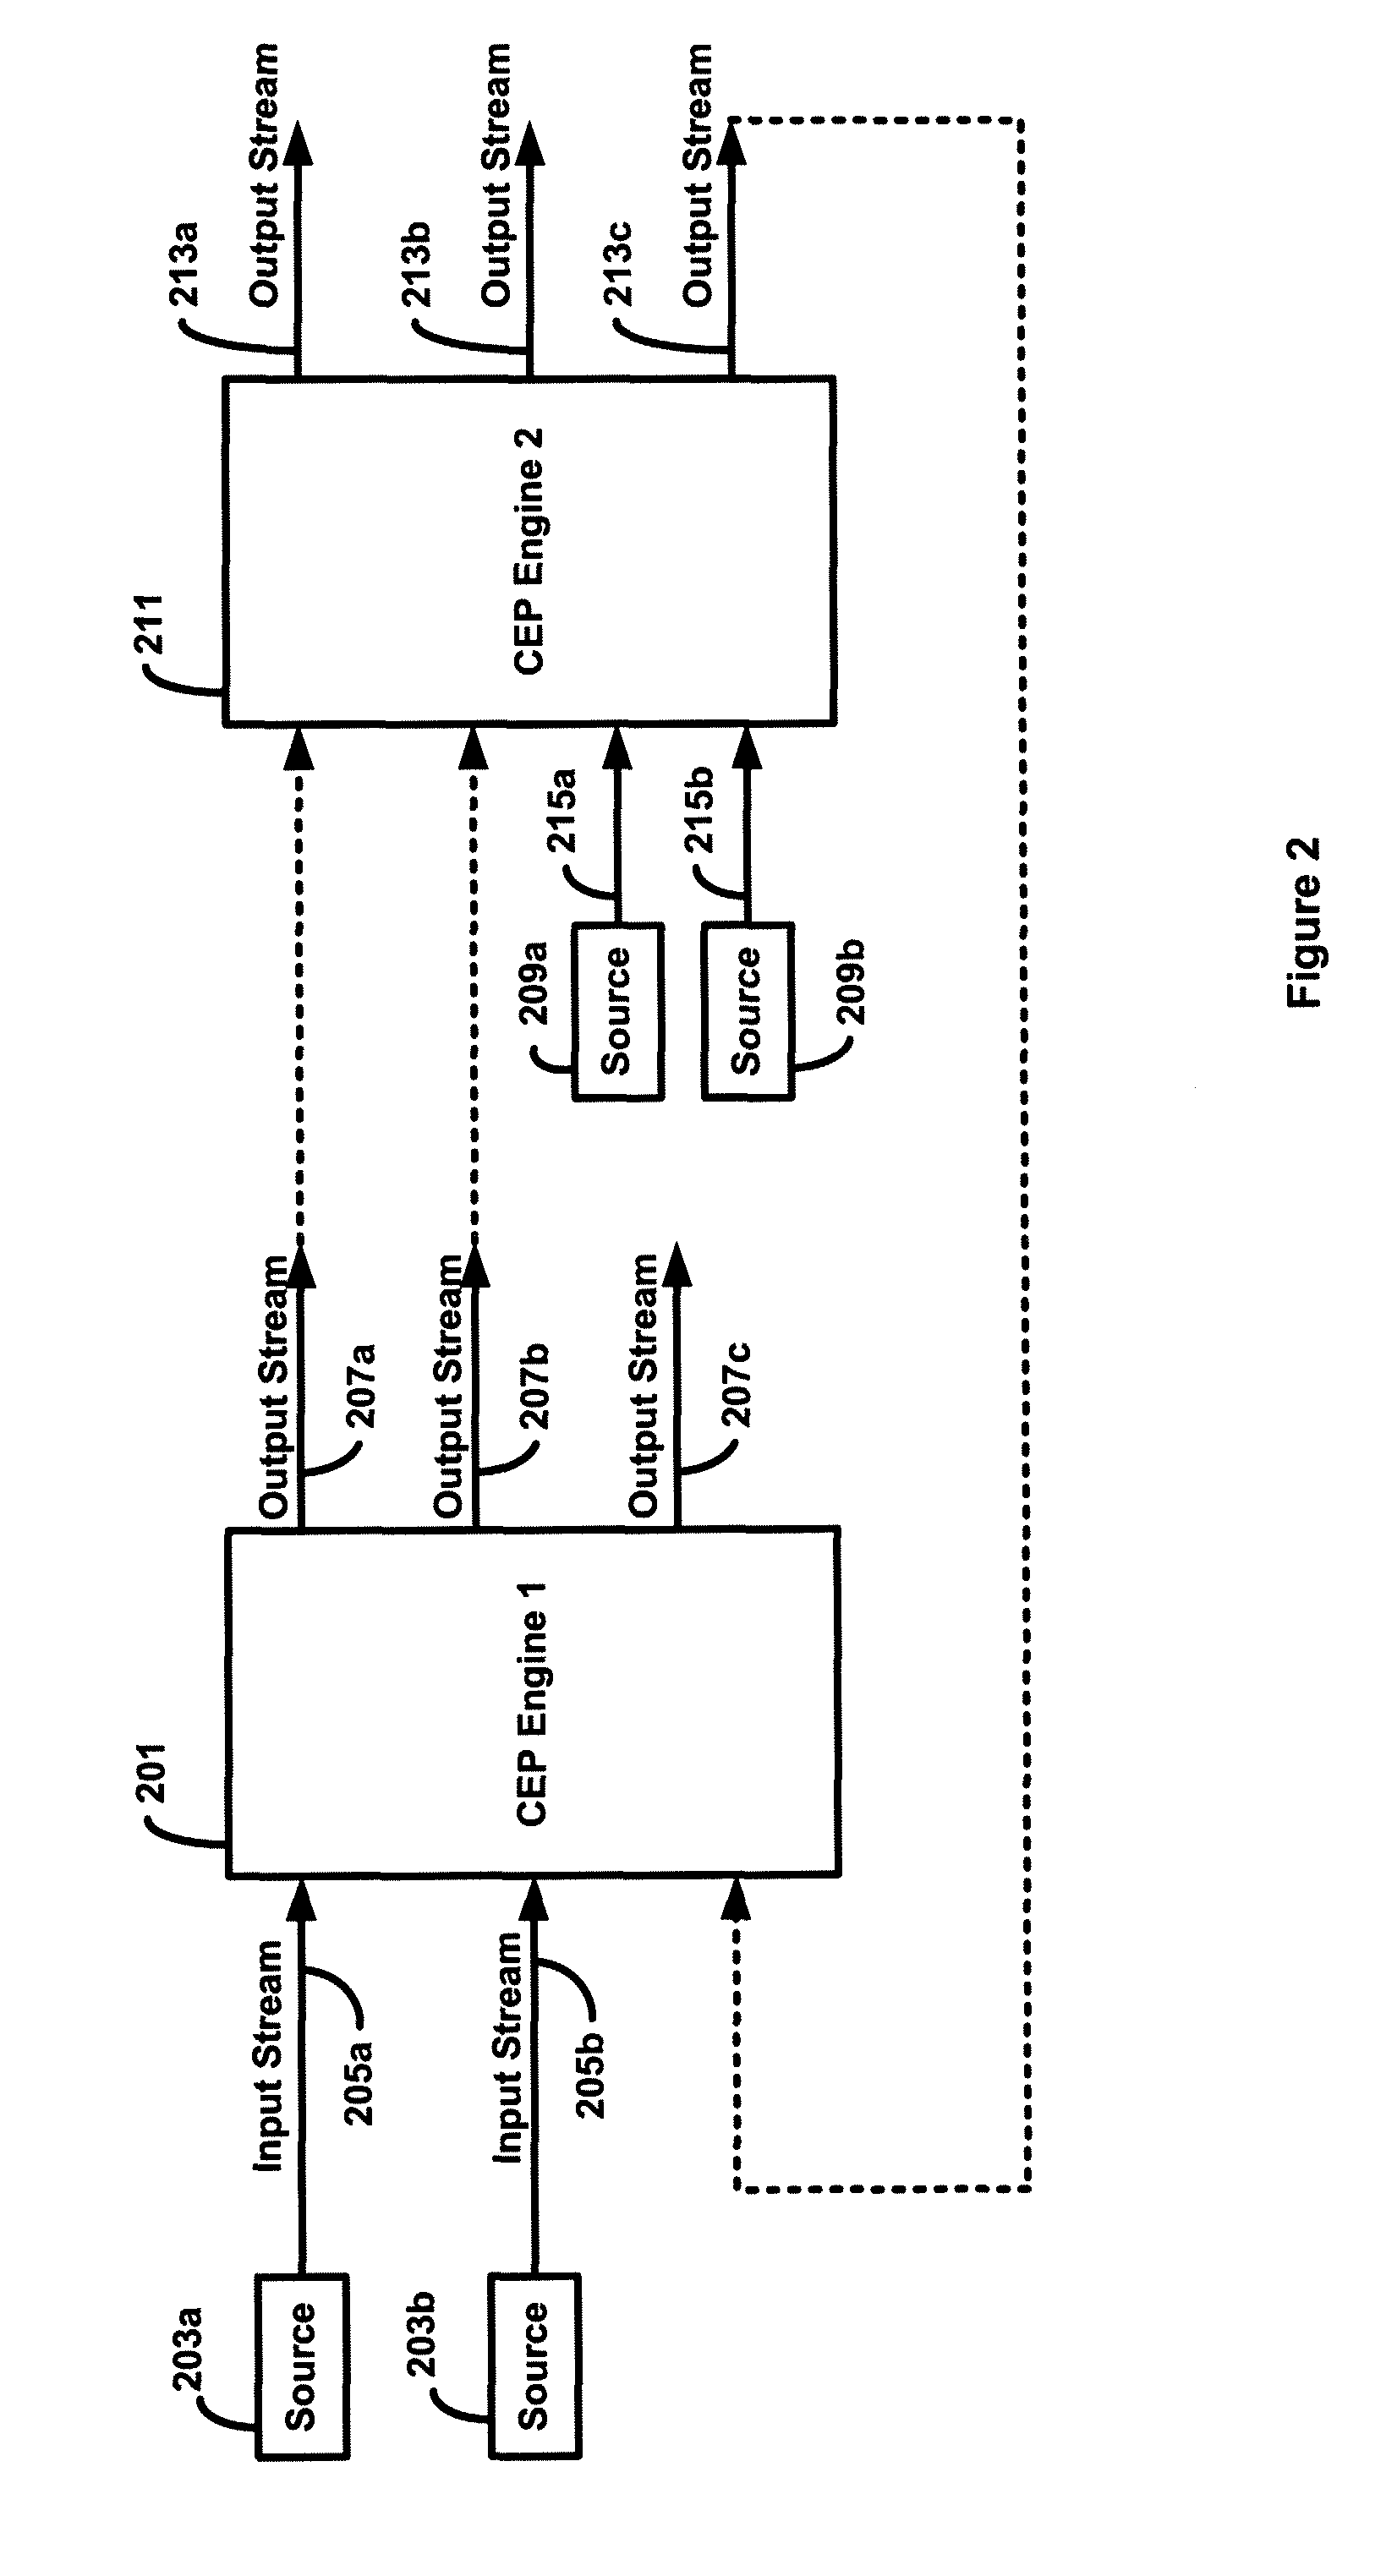 Systems and methods for complex event processing based on a hierarchical arrangement of complex event processing engines